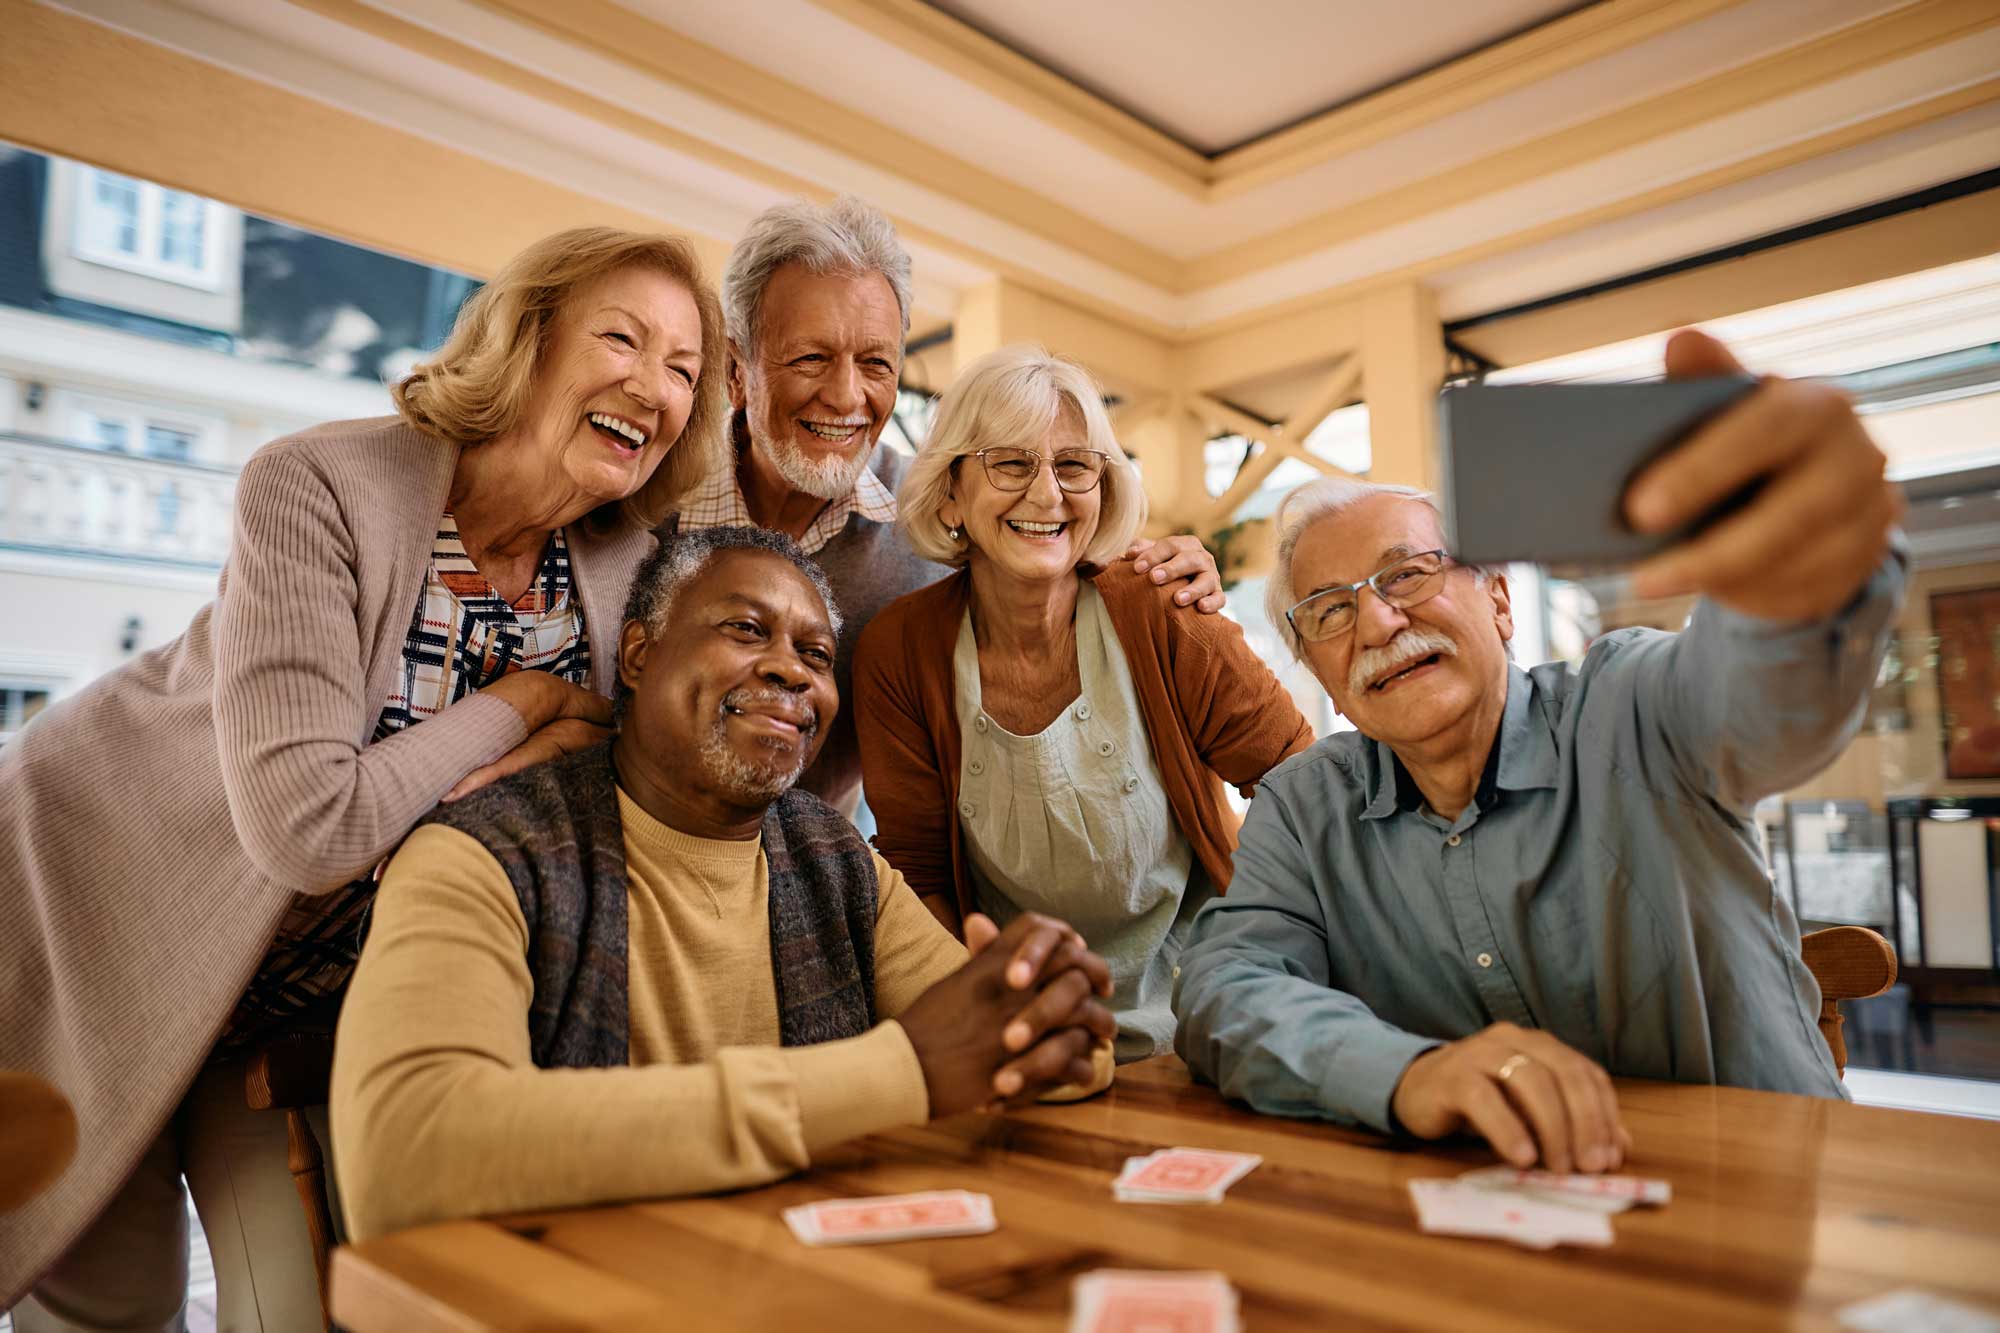 a group of senior friends gathered at home playing cards and posing for a selfie